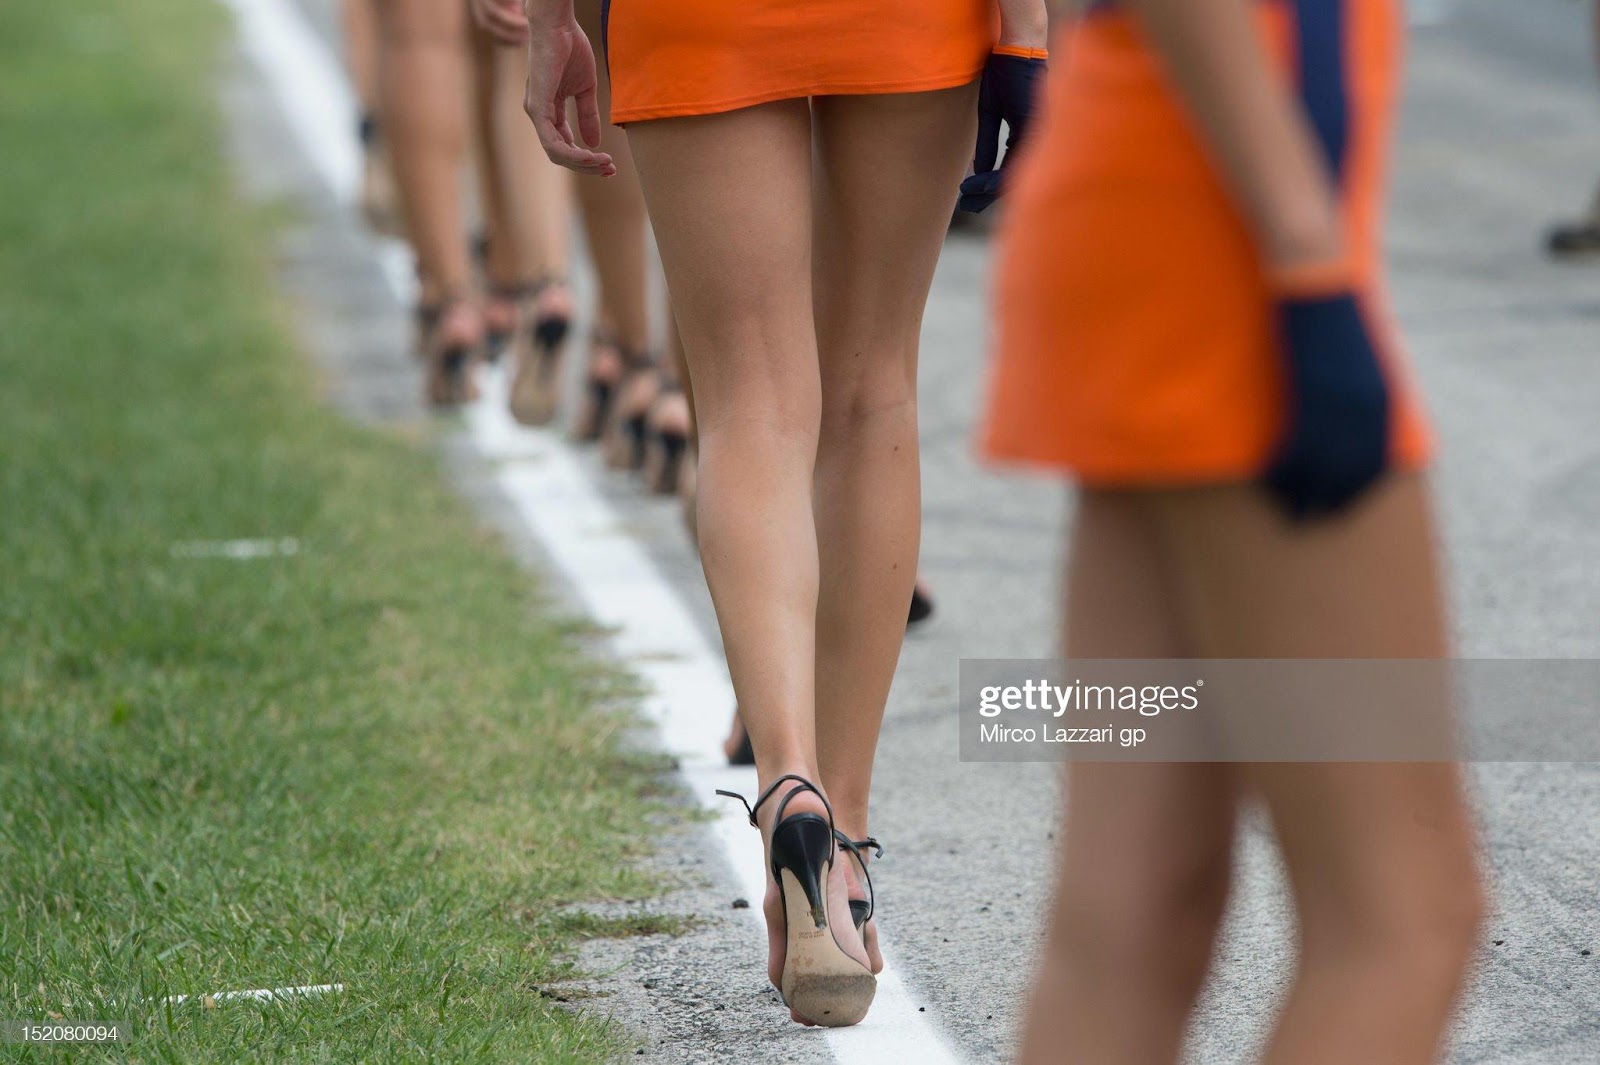 D:\Documenti\posts\posts\Women and motorsport\foto\Getty e altre\the-grid-girls-walk-on-the-grid-during-the-motogp-race-of-the-motogp-picture-id152080094.jpg